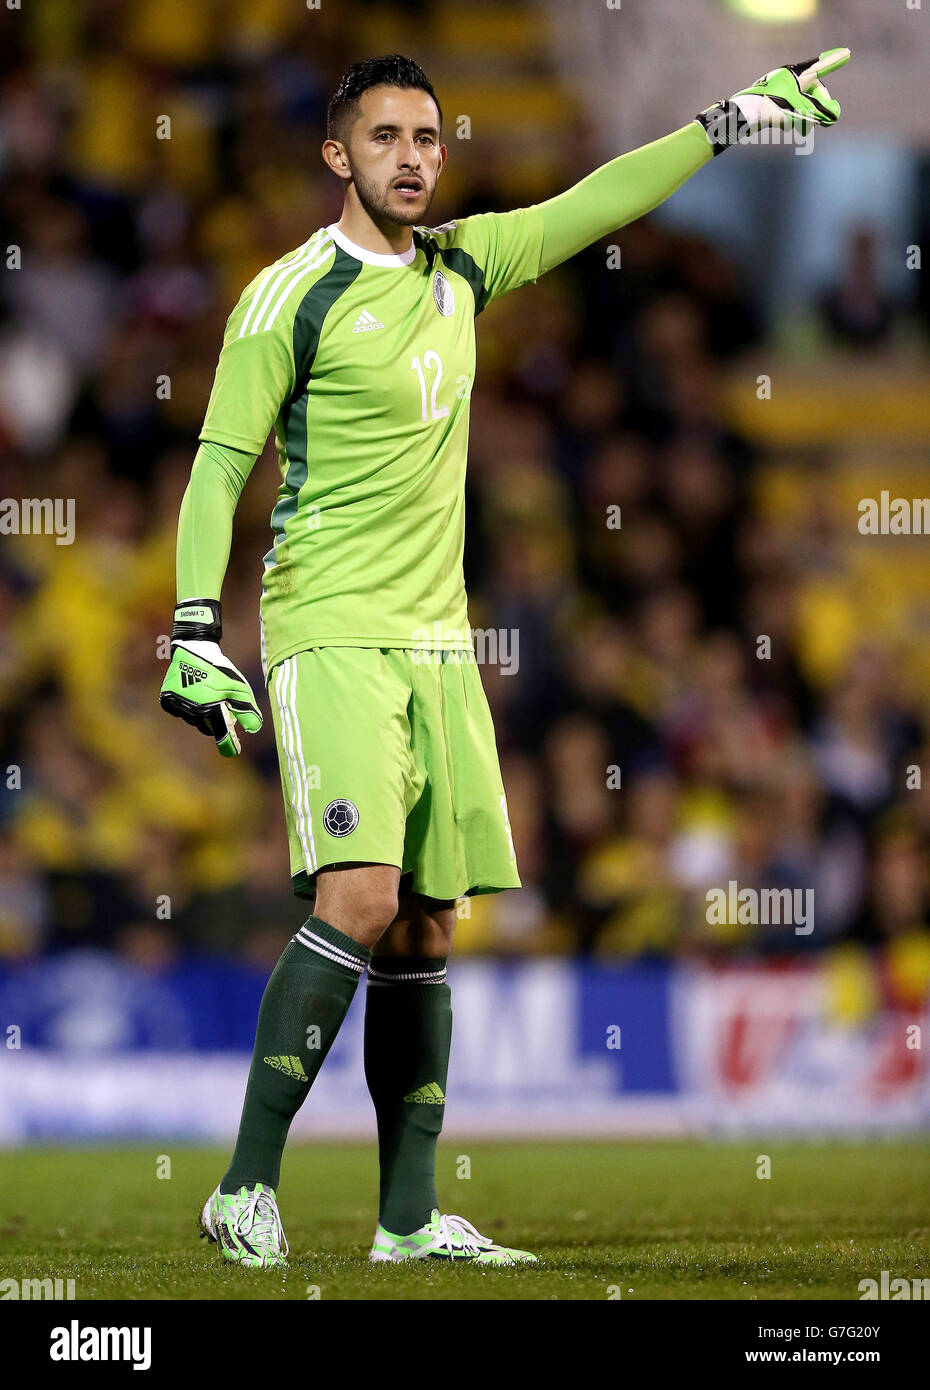 Soccer - International Friendly - Colombia v USA - Craven Cottage. Colombia goalkeeper Camilo Vargas Stock Photo